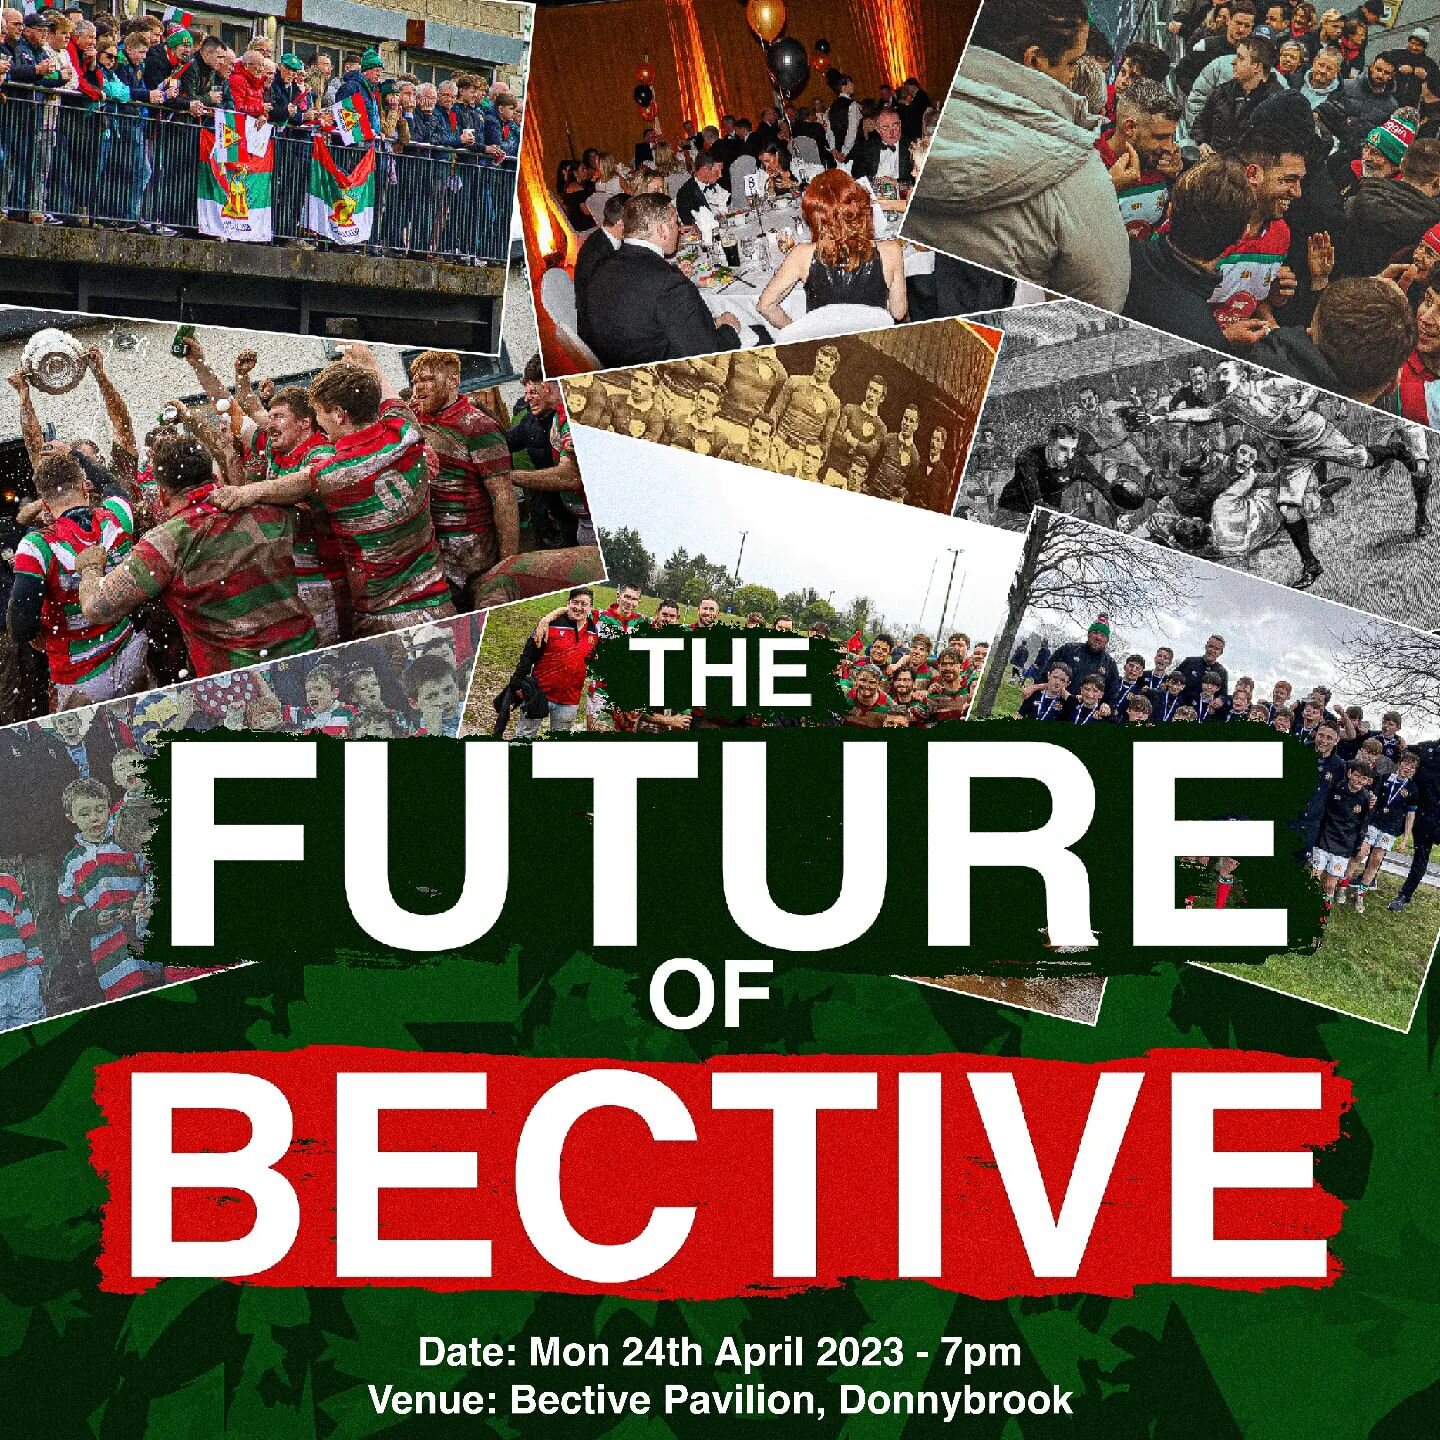 Bective are delighted to invite you to the &ldquo;Harvest Event&rdquo; which is the next step for the Club in the planning for &ldquo;The Future of&nbsp;Bective&rdquo;. 

As you know,&nbsp;Bective&nbsp;held an event in the Pavilion called the &ldquo;